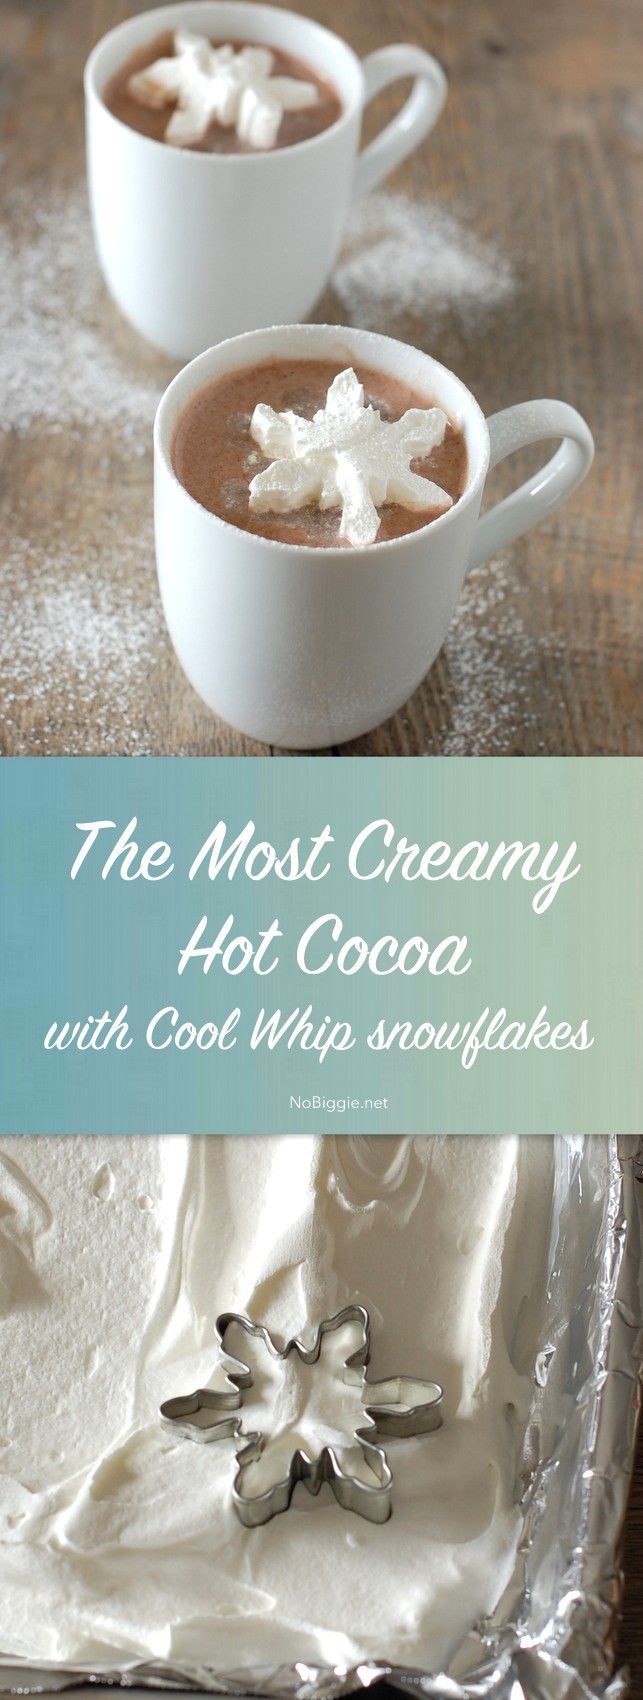 the most creamy hot cocoa with cool whip snowflakes